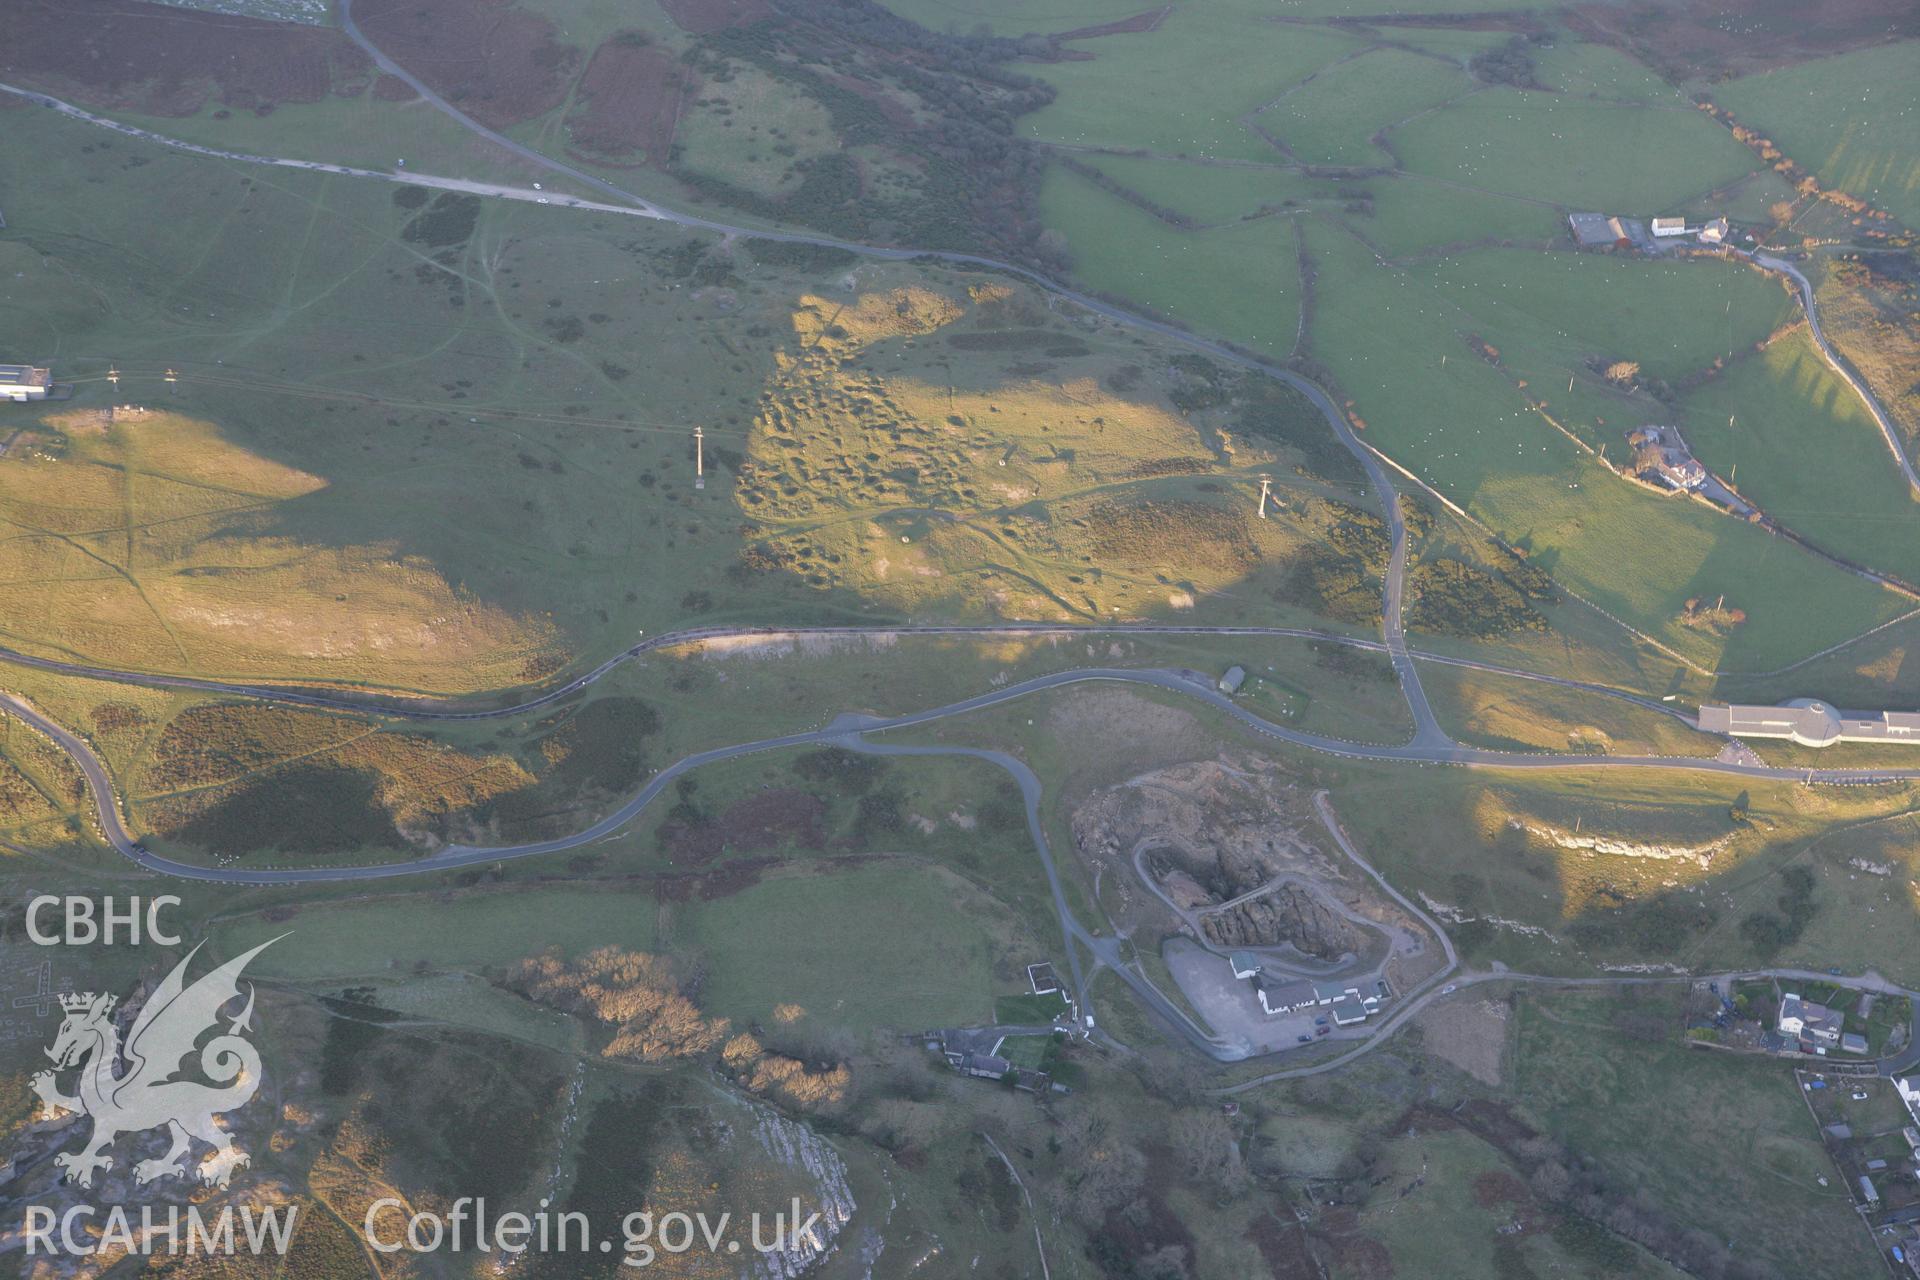 RCAHMW colour oblique photograph of Great Orme Copper Mines. Taken by Toby Driver on 20/12/2007.